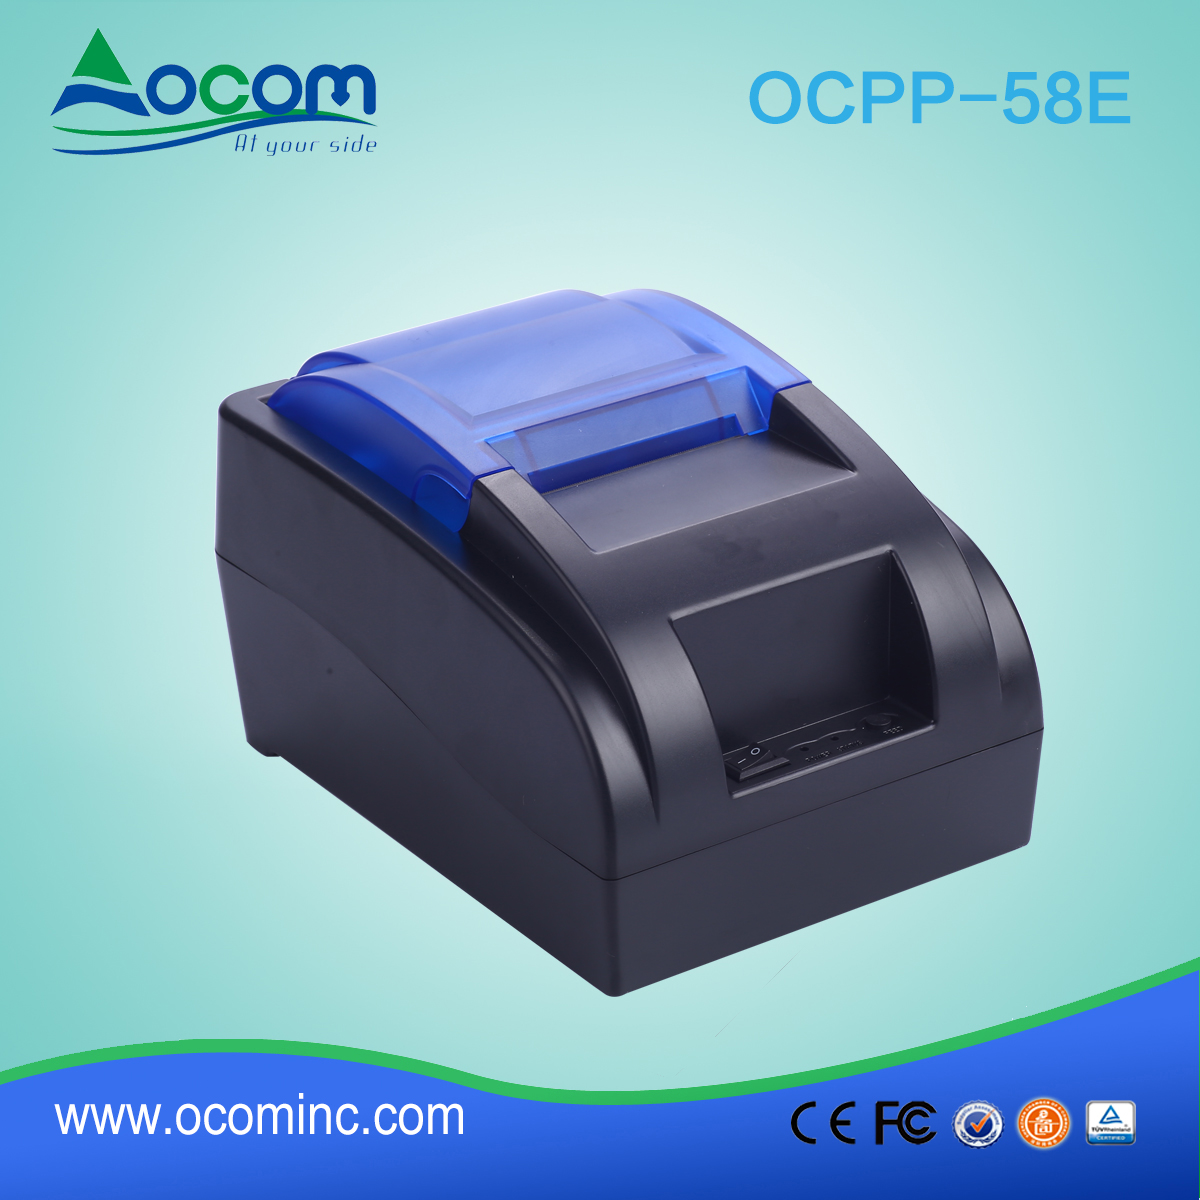 OCPP-58E-China made low cost 58mm POS printer with Bluetooth or WIFI option